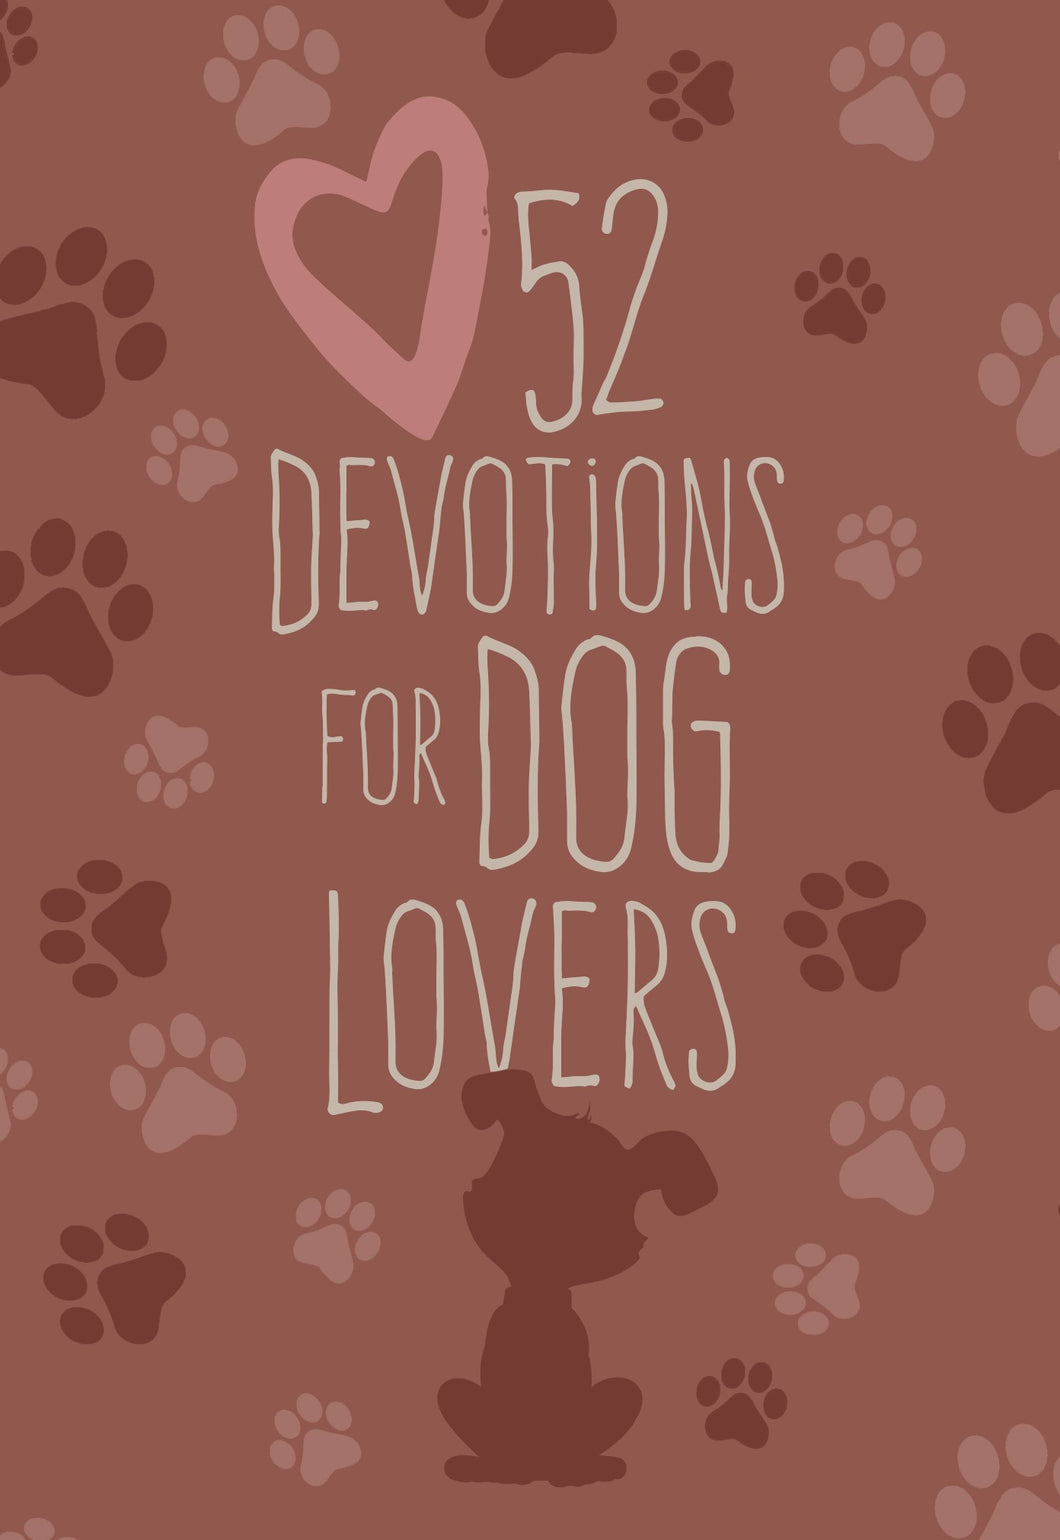 52 Devotions For Dog Lovers